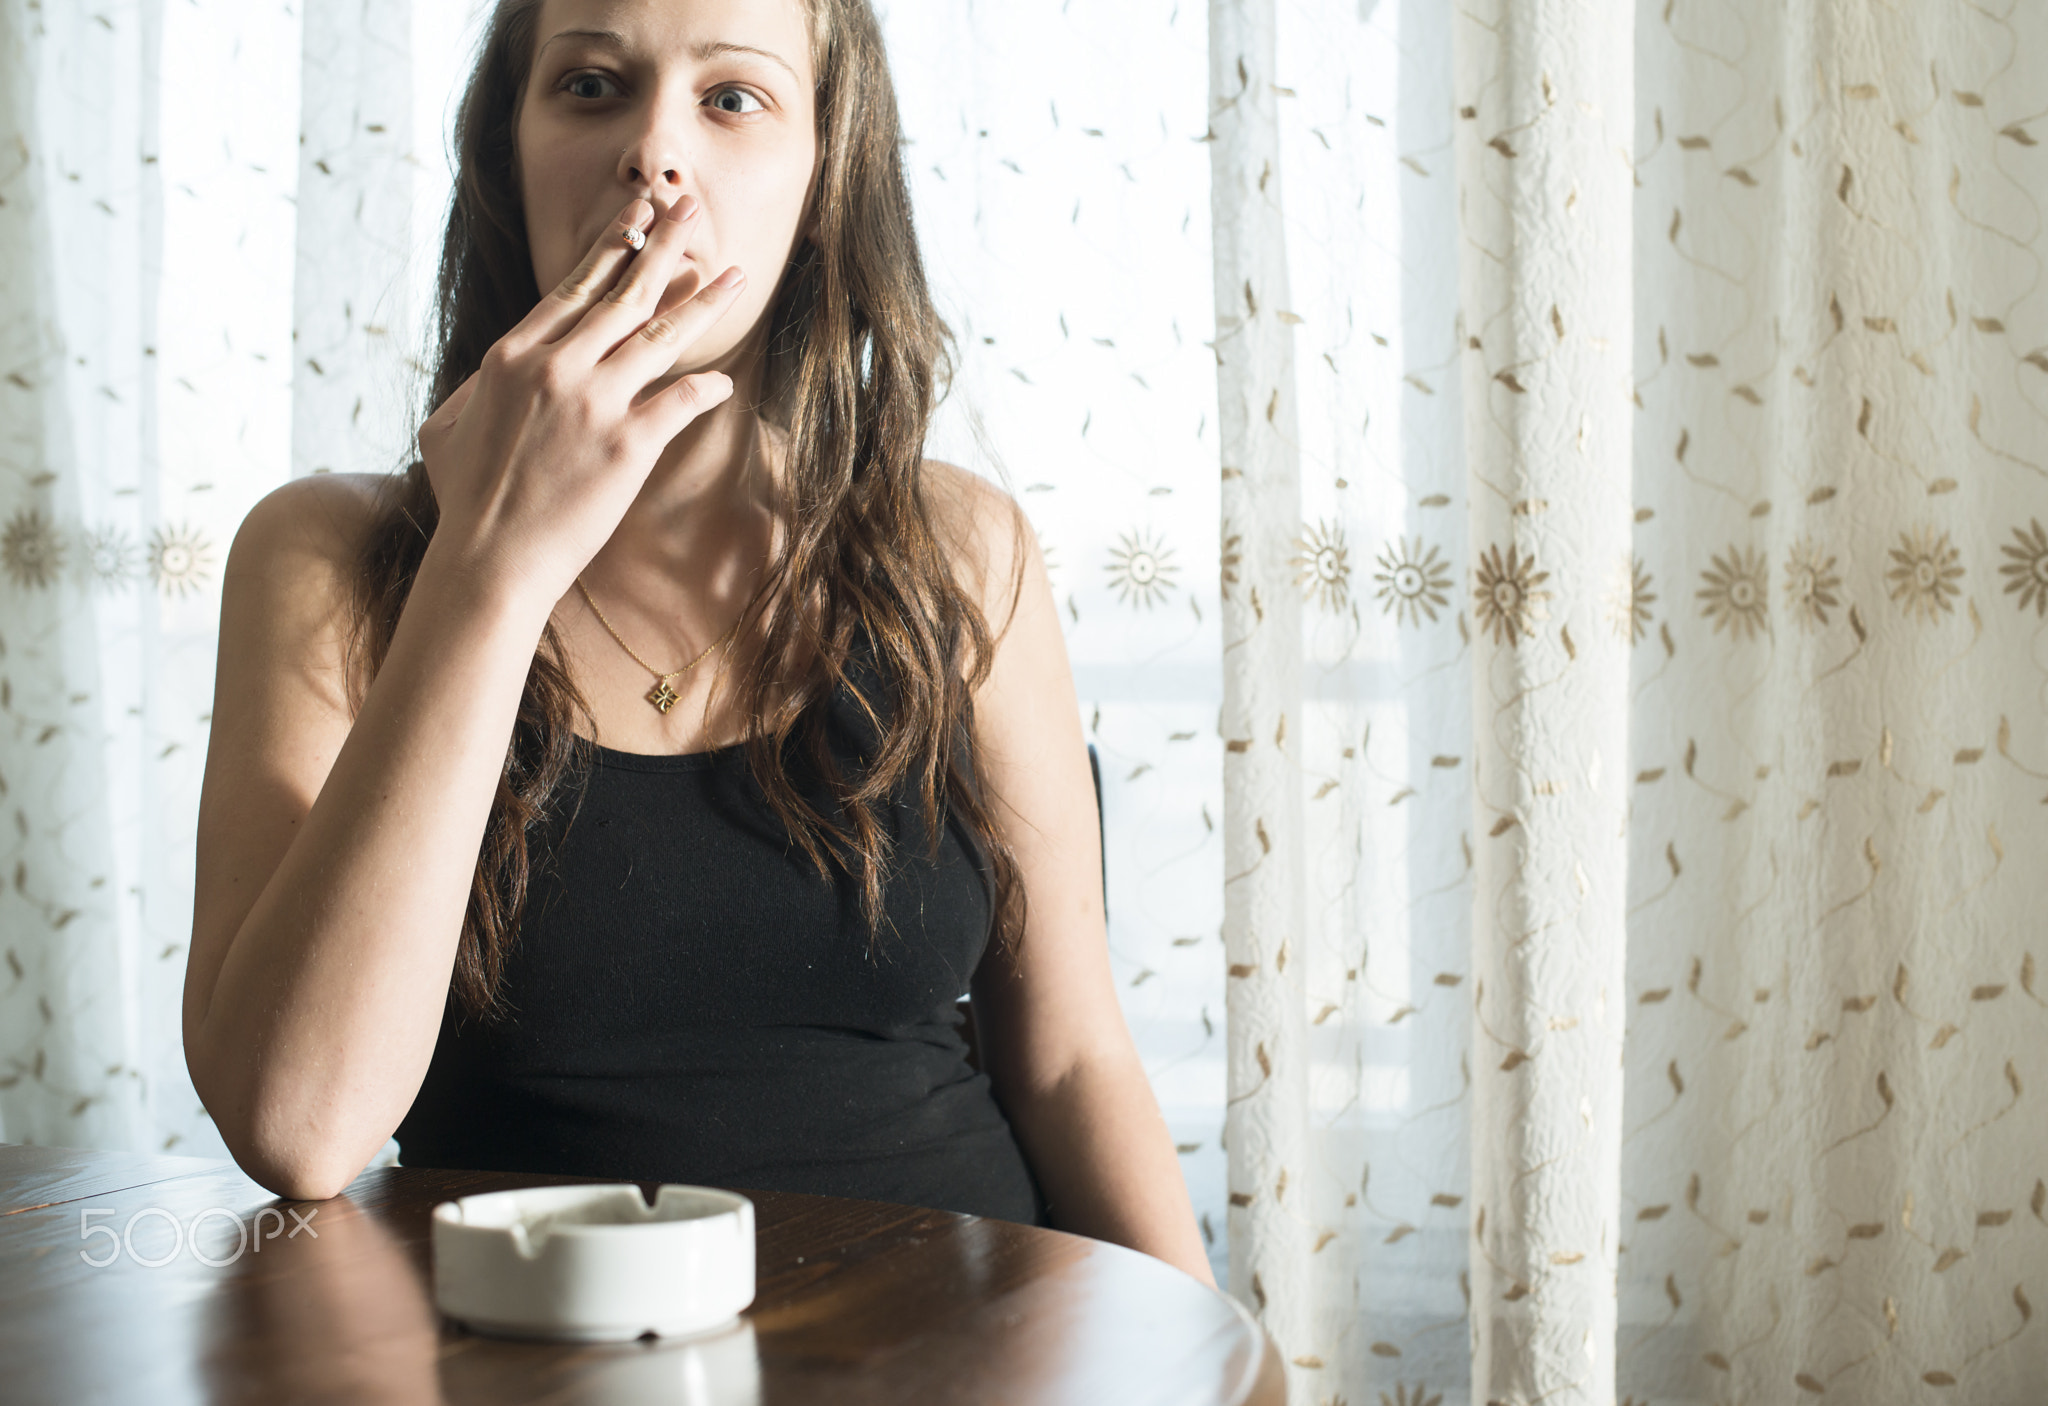 Girl smokes cigarette and holds ashtray.